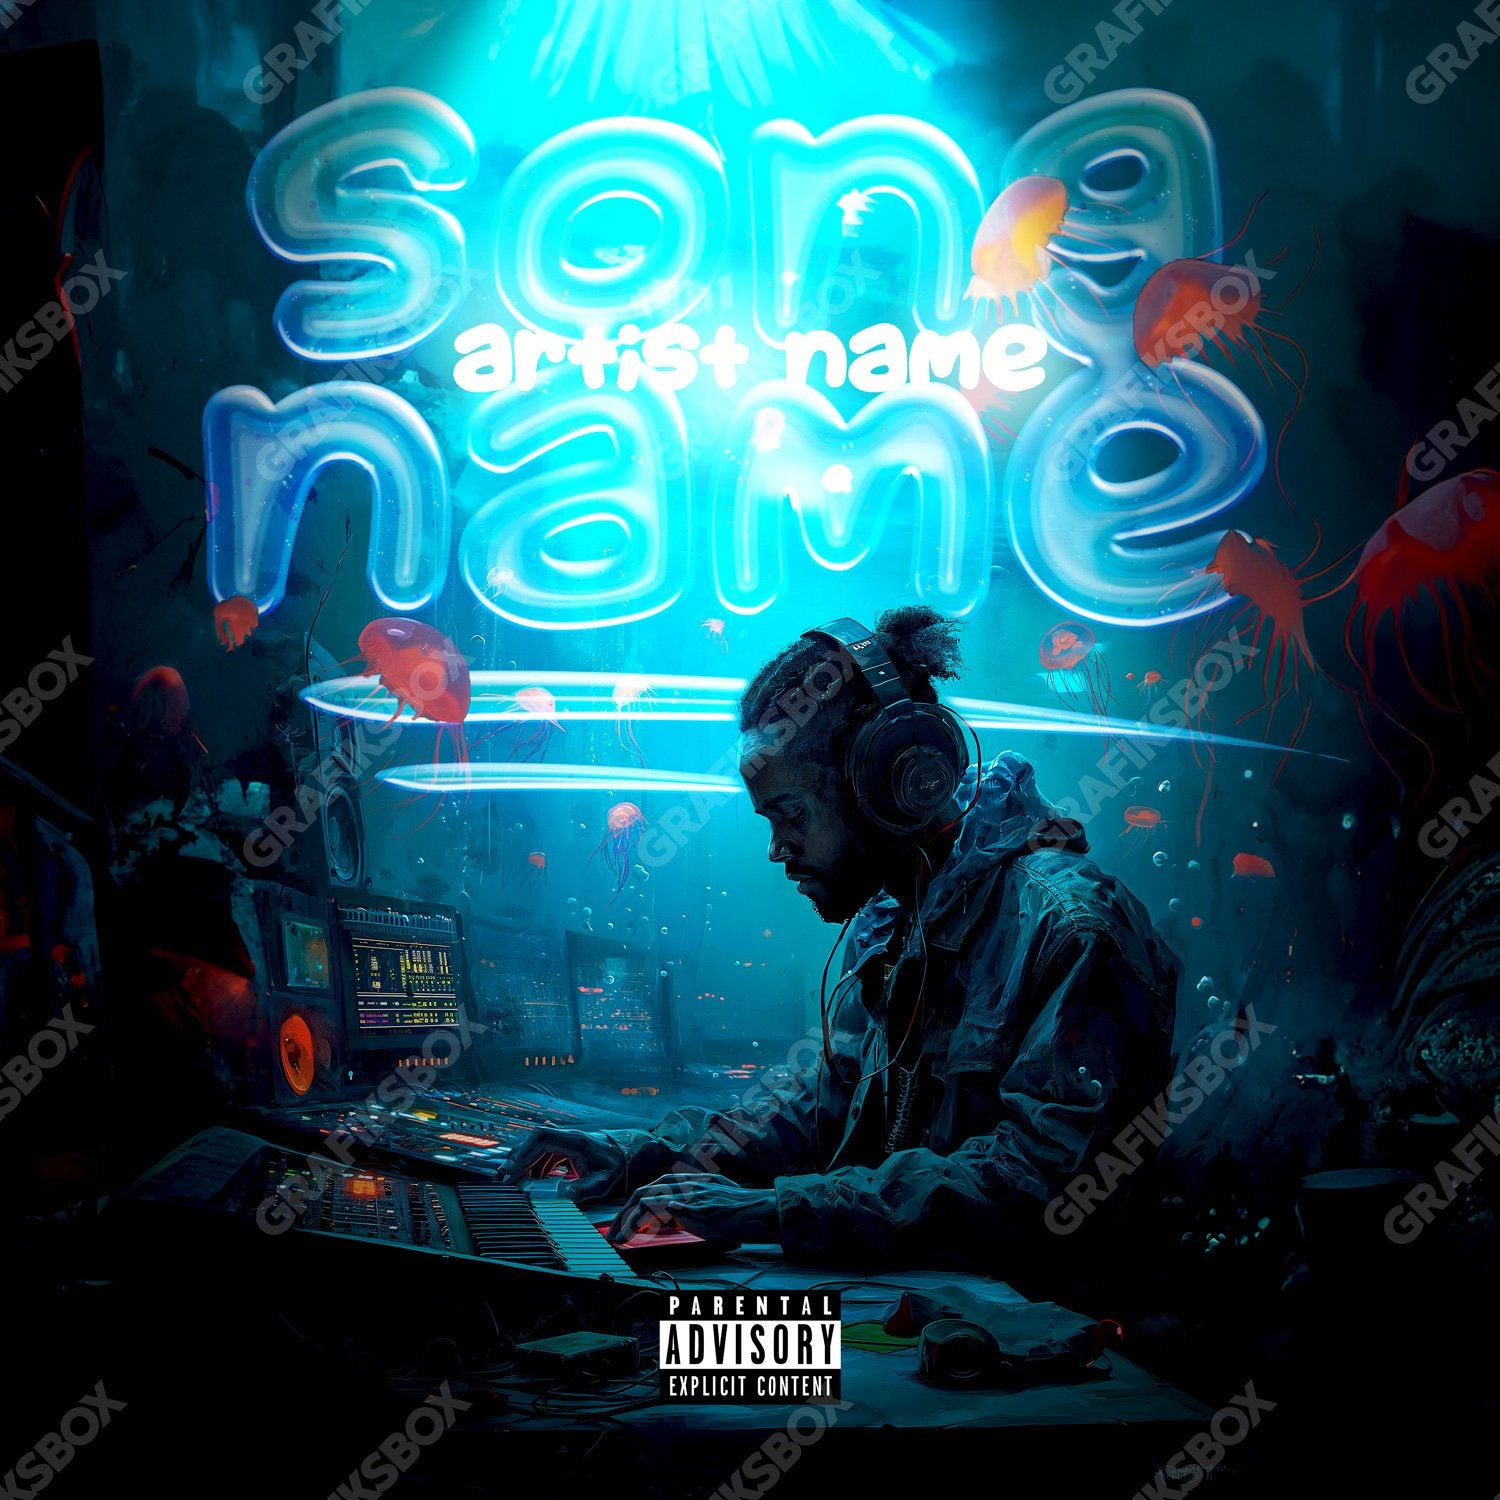 Under Song premade cover art